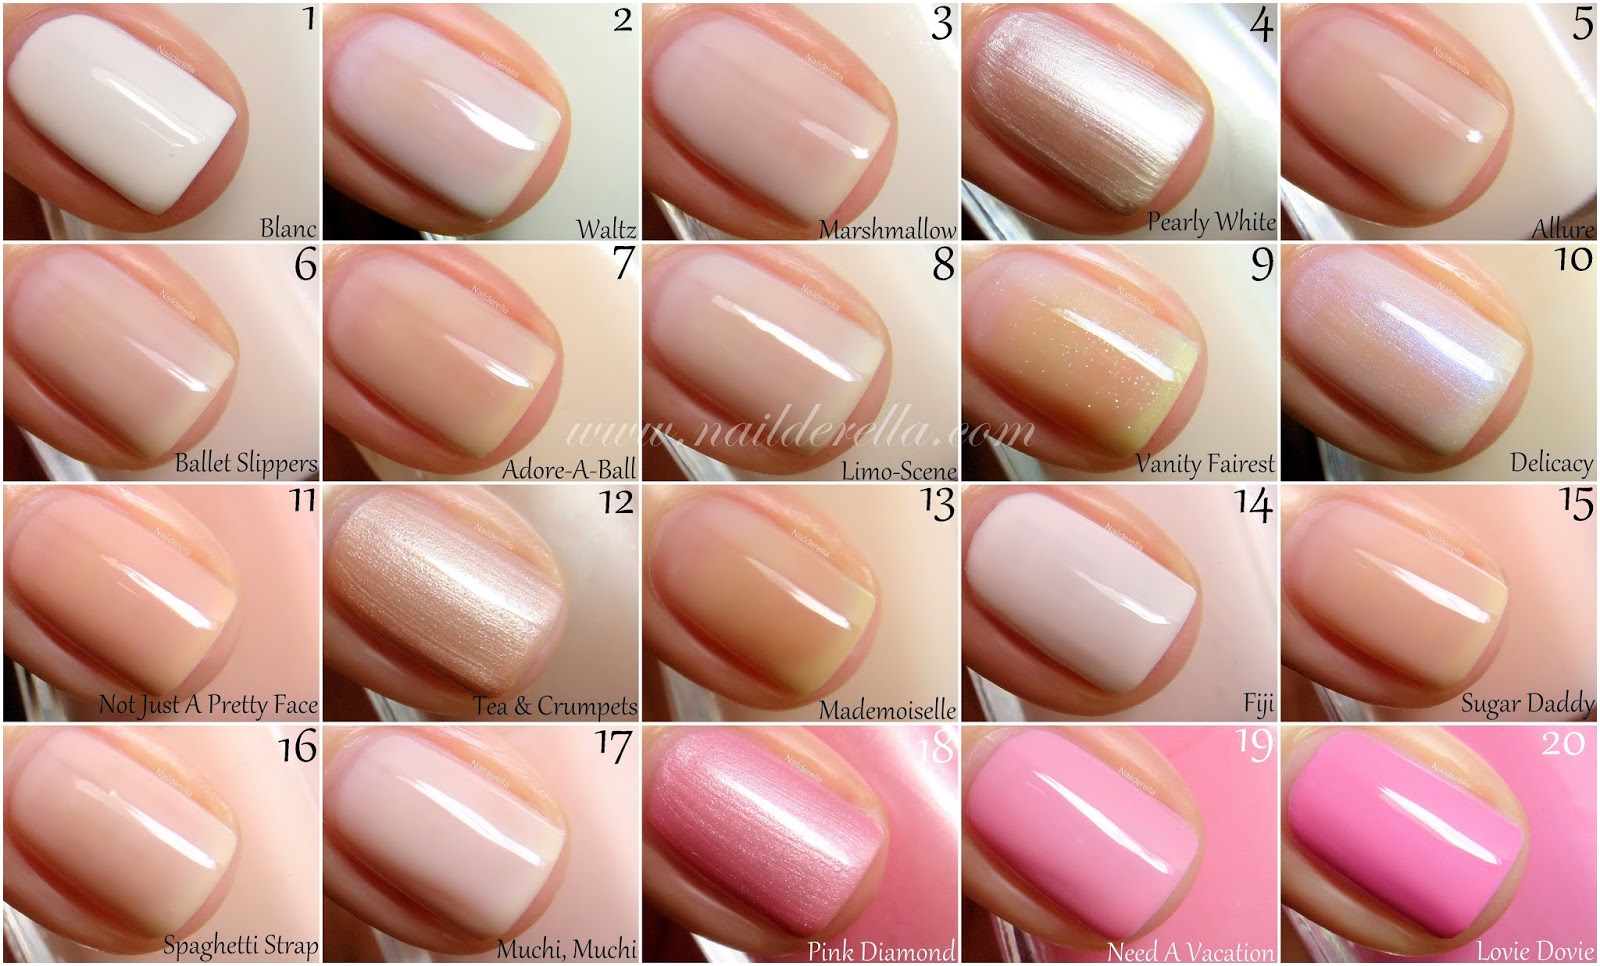 1. Neutral shades like beige, nude, or light pink - wide 8